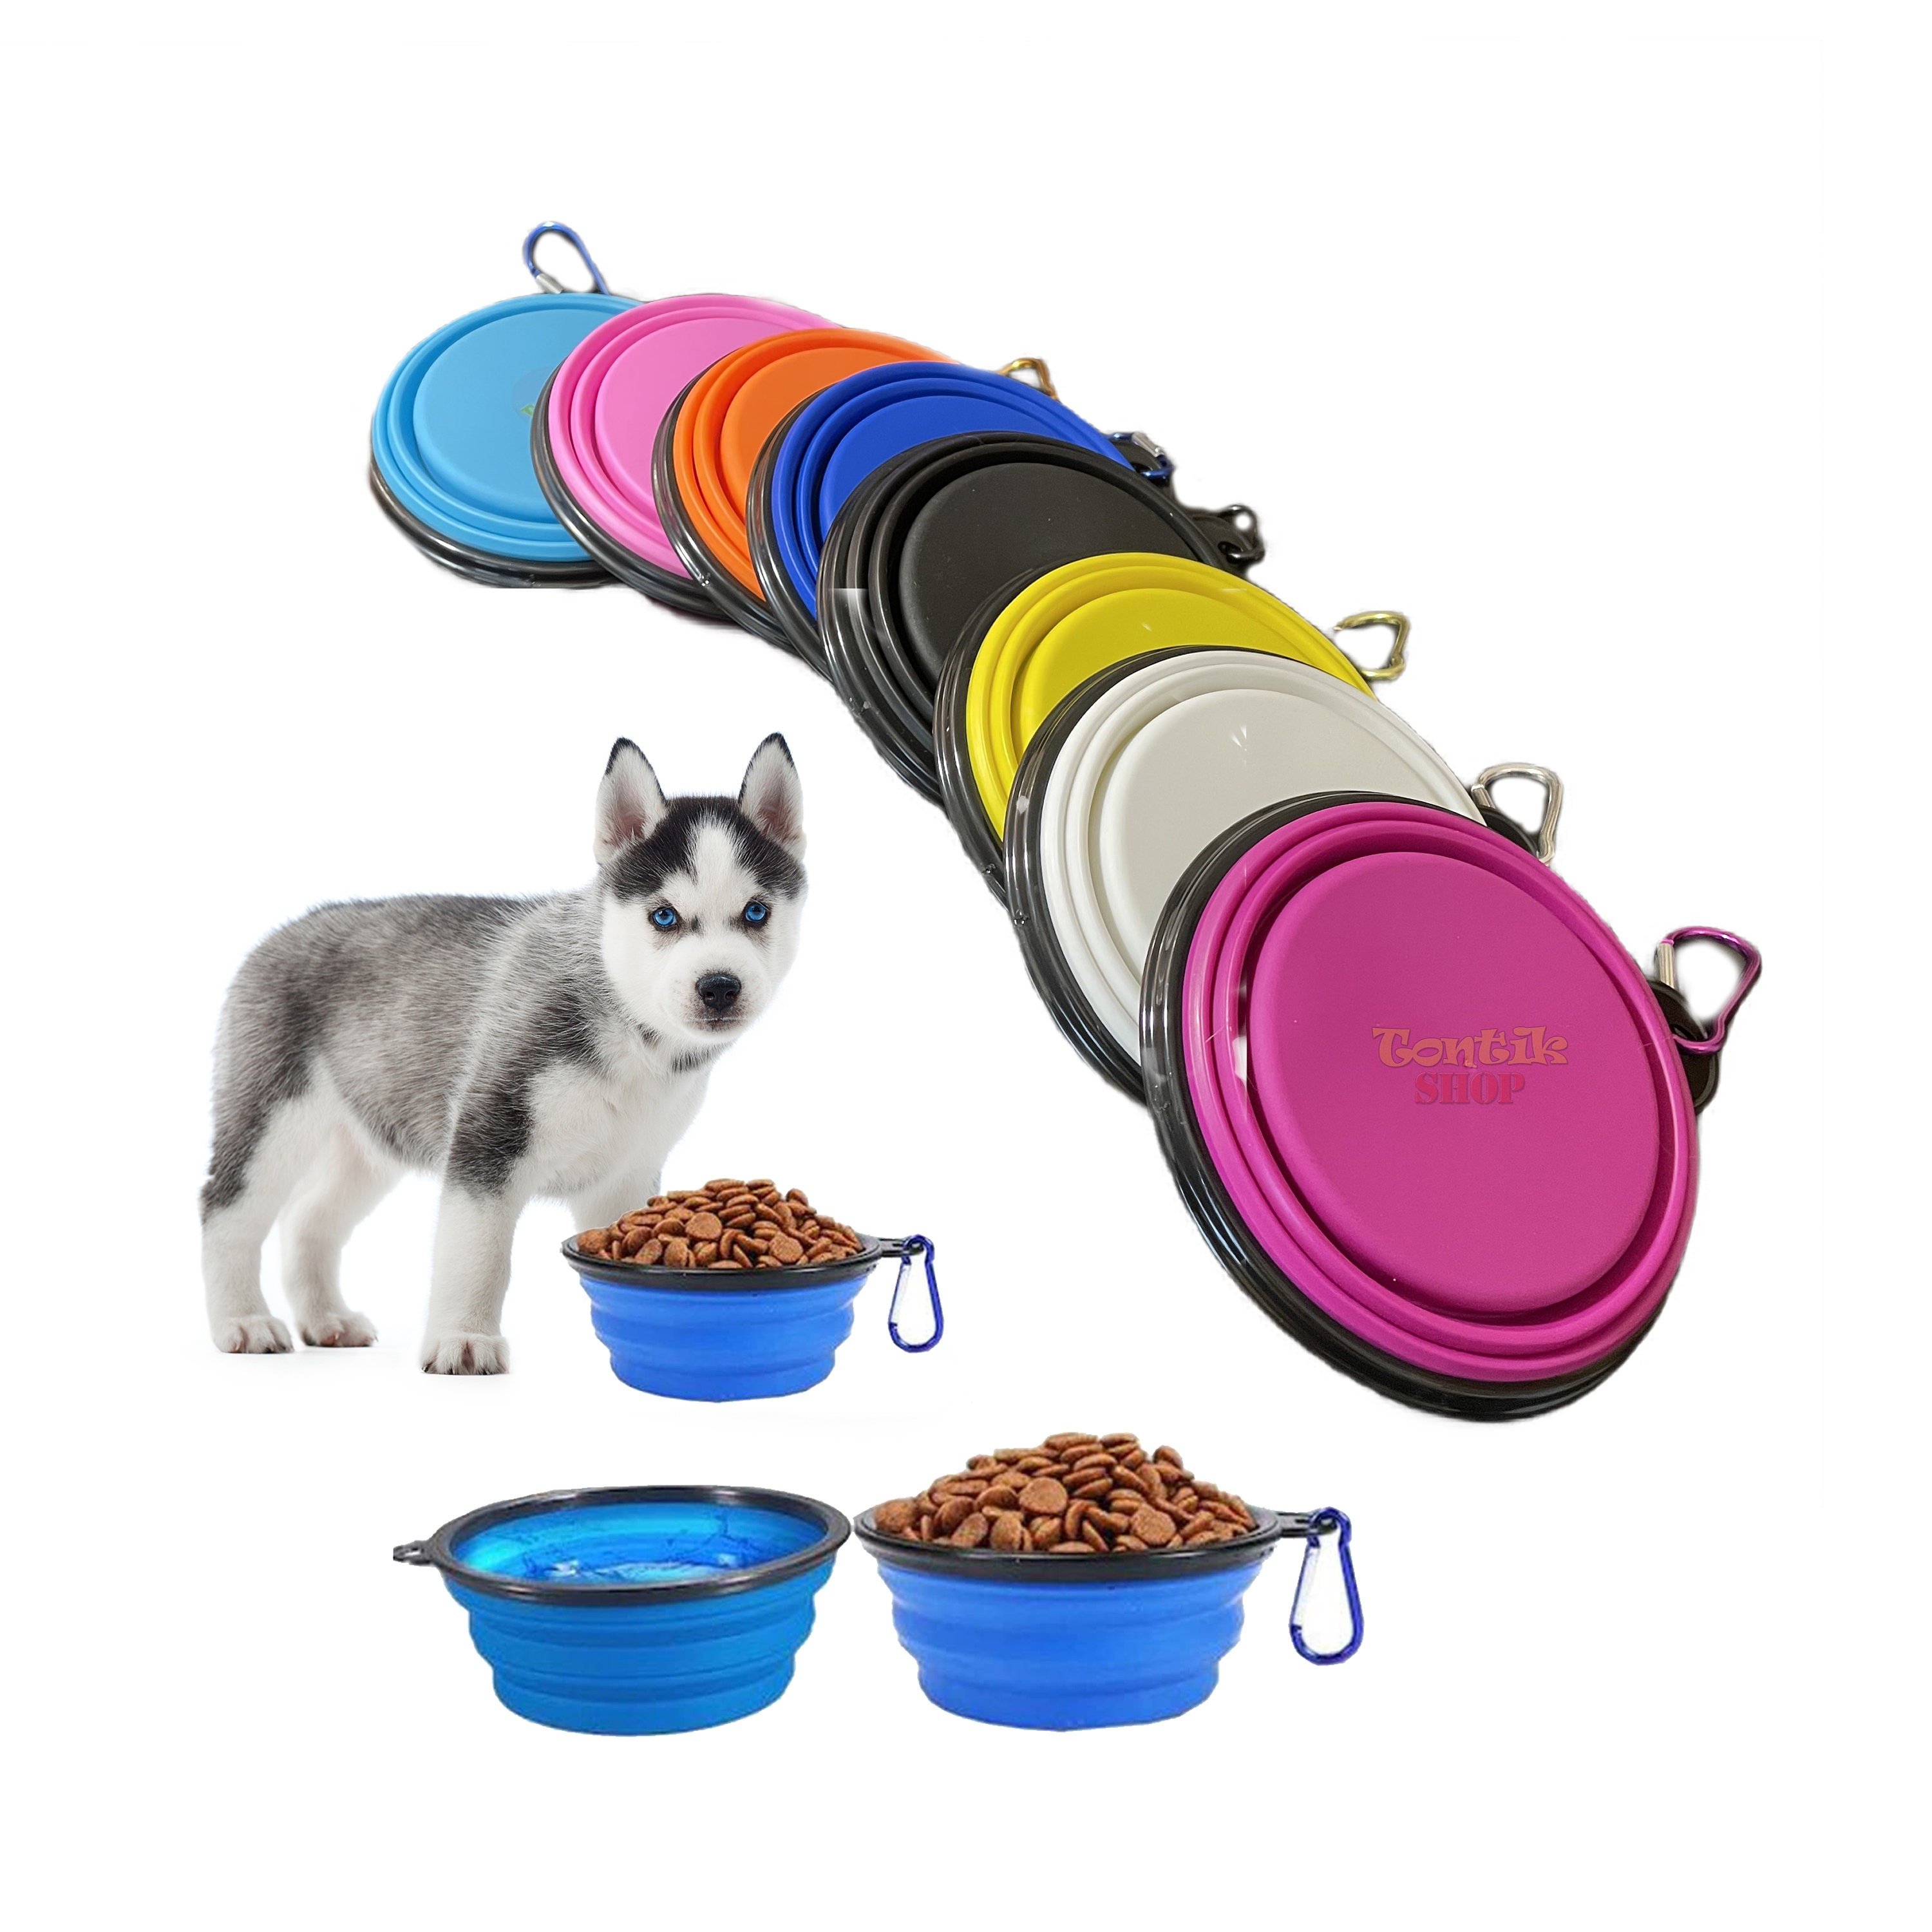 Gorilla Grip Collapsible Dog Bowl, Silicone Set of 2 Travel Bowls with  Carabiner, Foldable and Portable Accessories for Cat and Dogs, Small Pet  Hiking